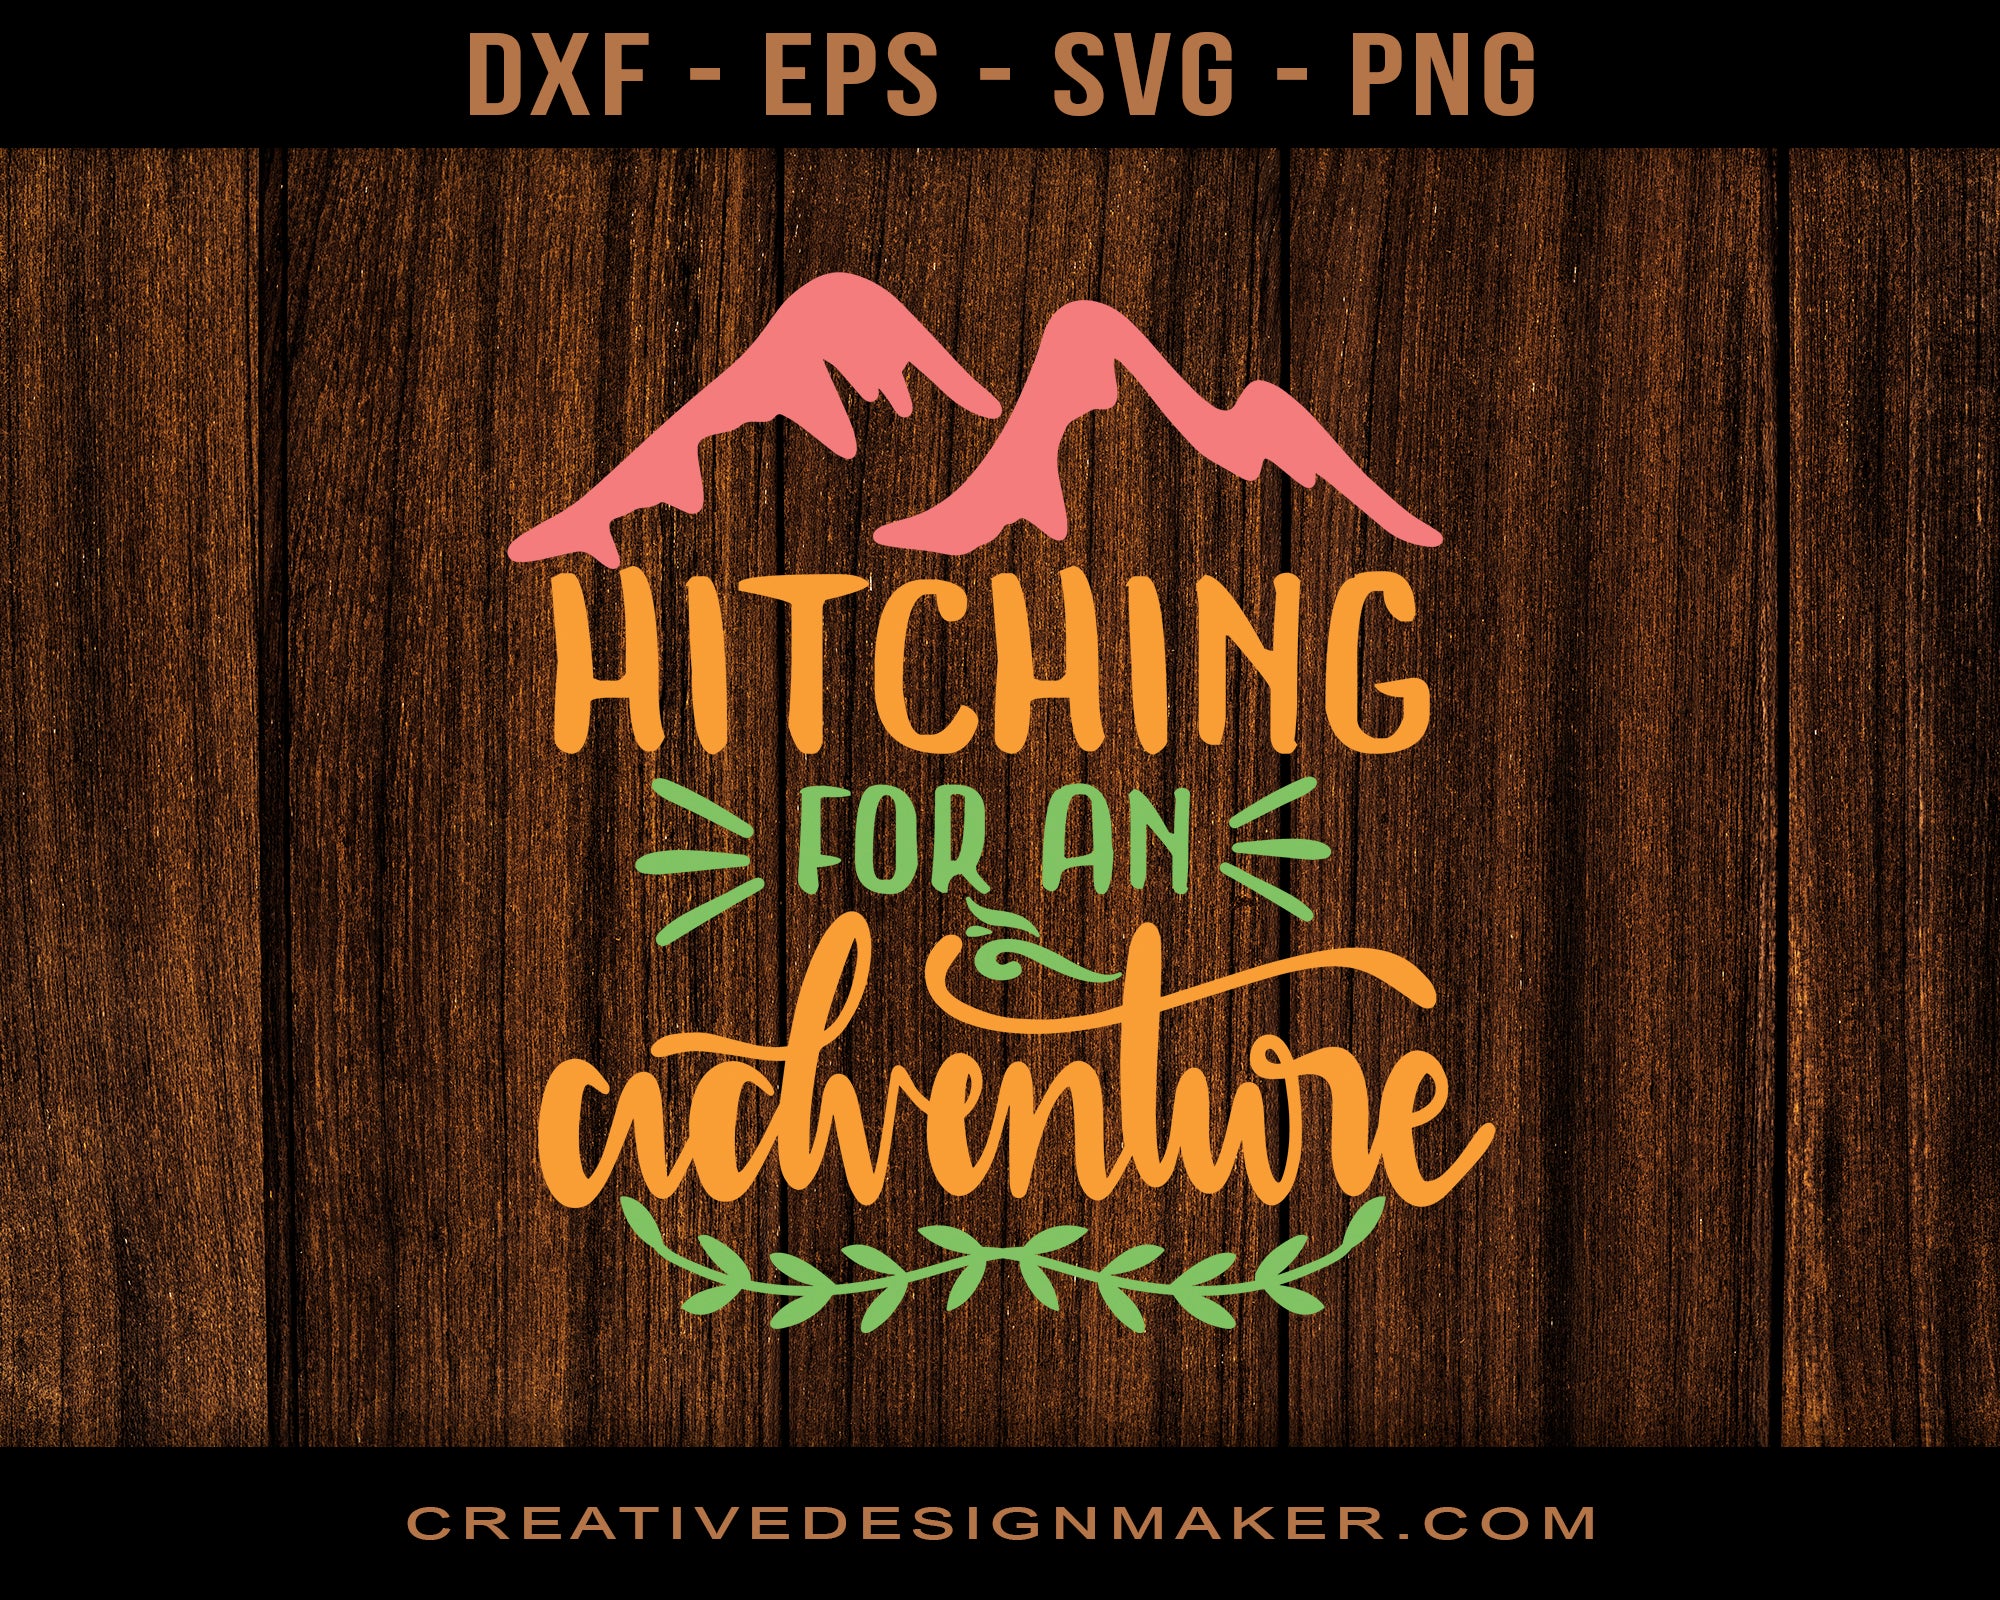 Hitching For An Adventure Adventure Svg Dxf Png Eps Printable Files!